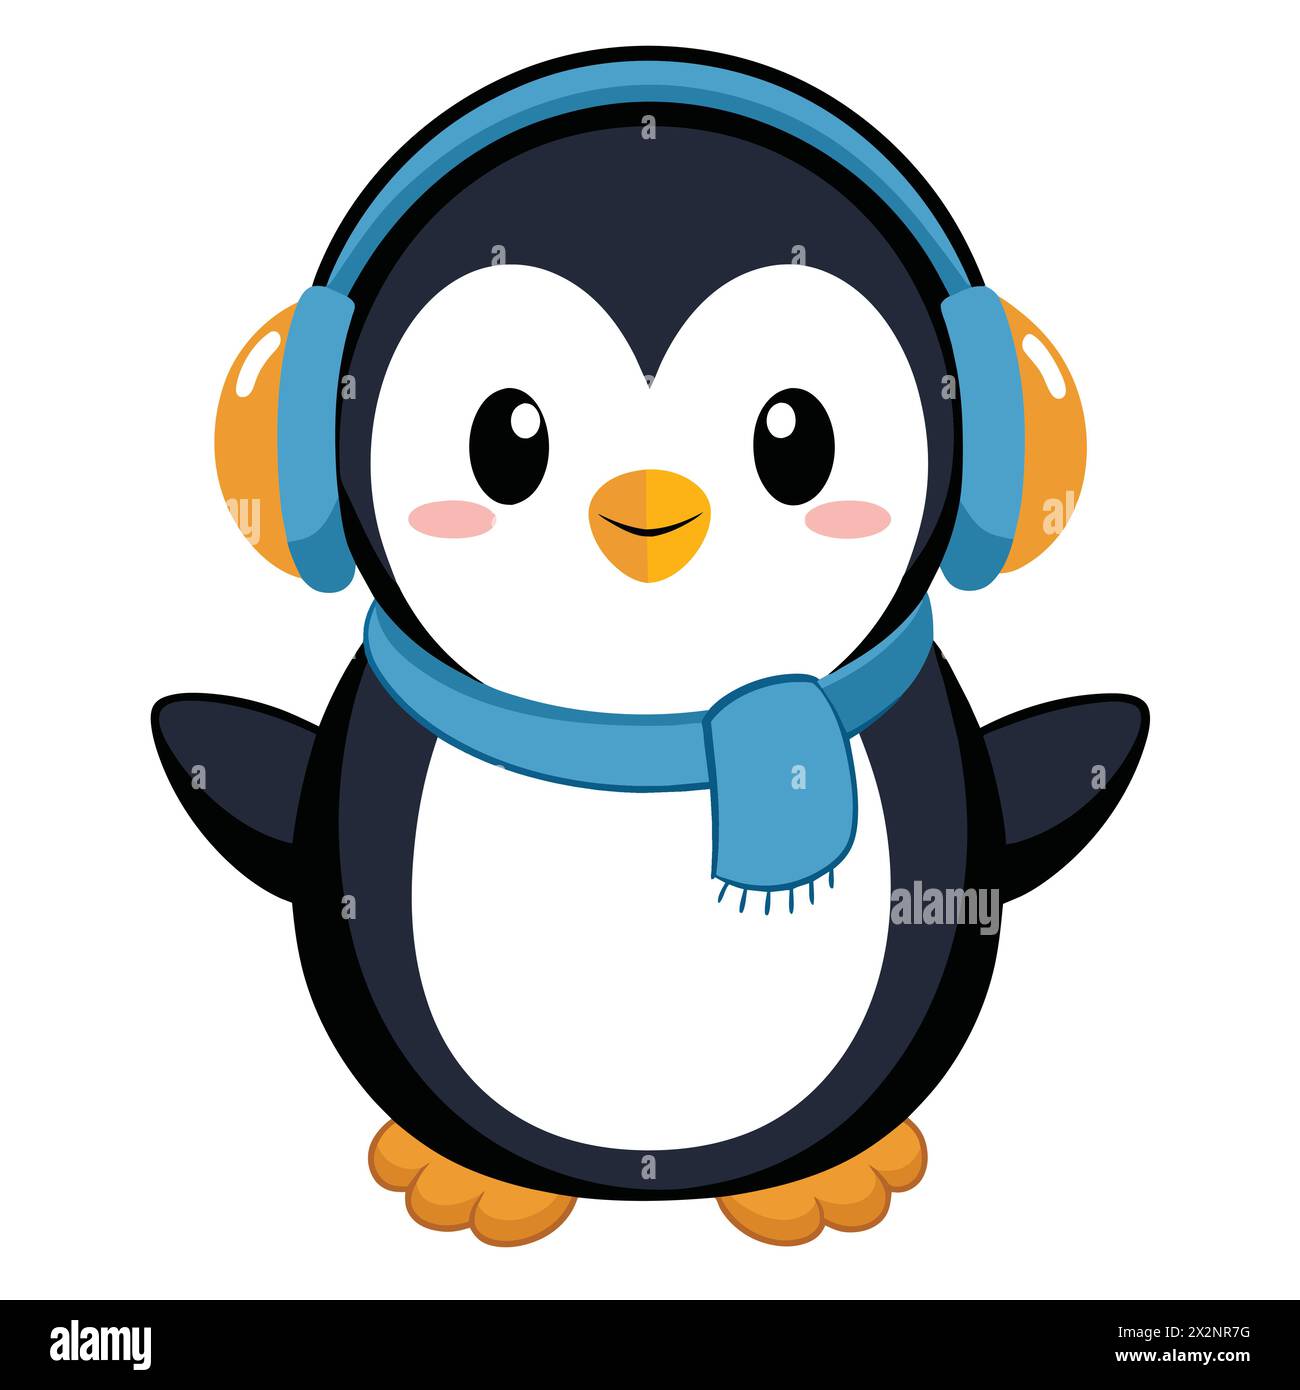 Waddle Wobble Warmth: Adorable Earmuffed Penguin, perfect for Children's Books Cards Invitations Logos Web Design T-Shirts Greeting Cards Stationery Stock Vector